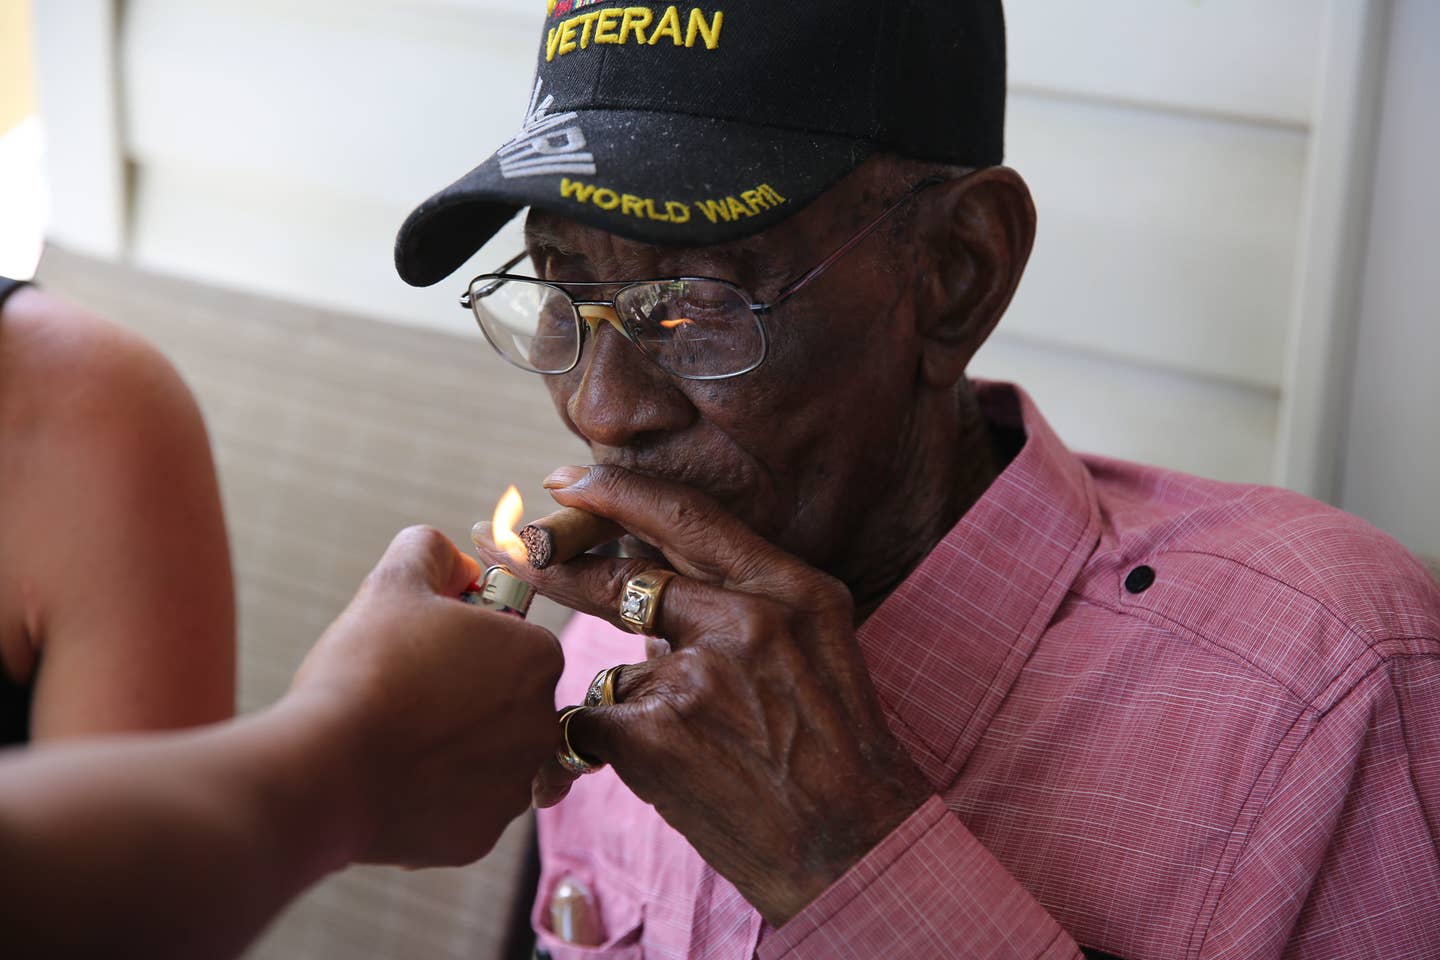 Richard Overton getting a light for his cigar on his 112th birthday.